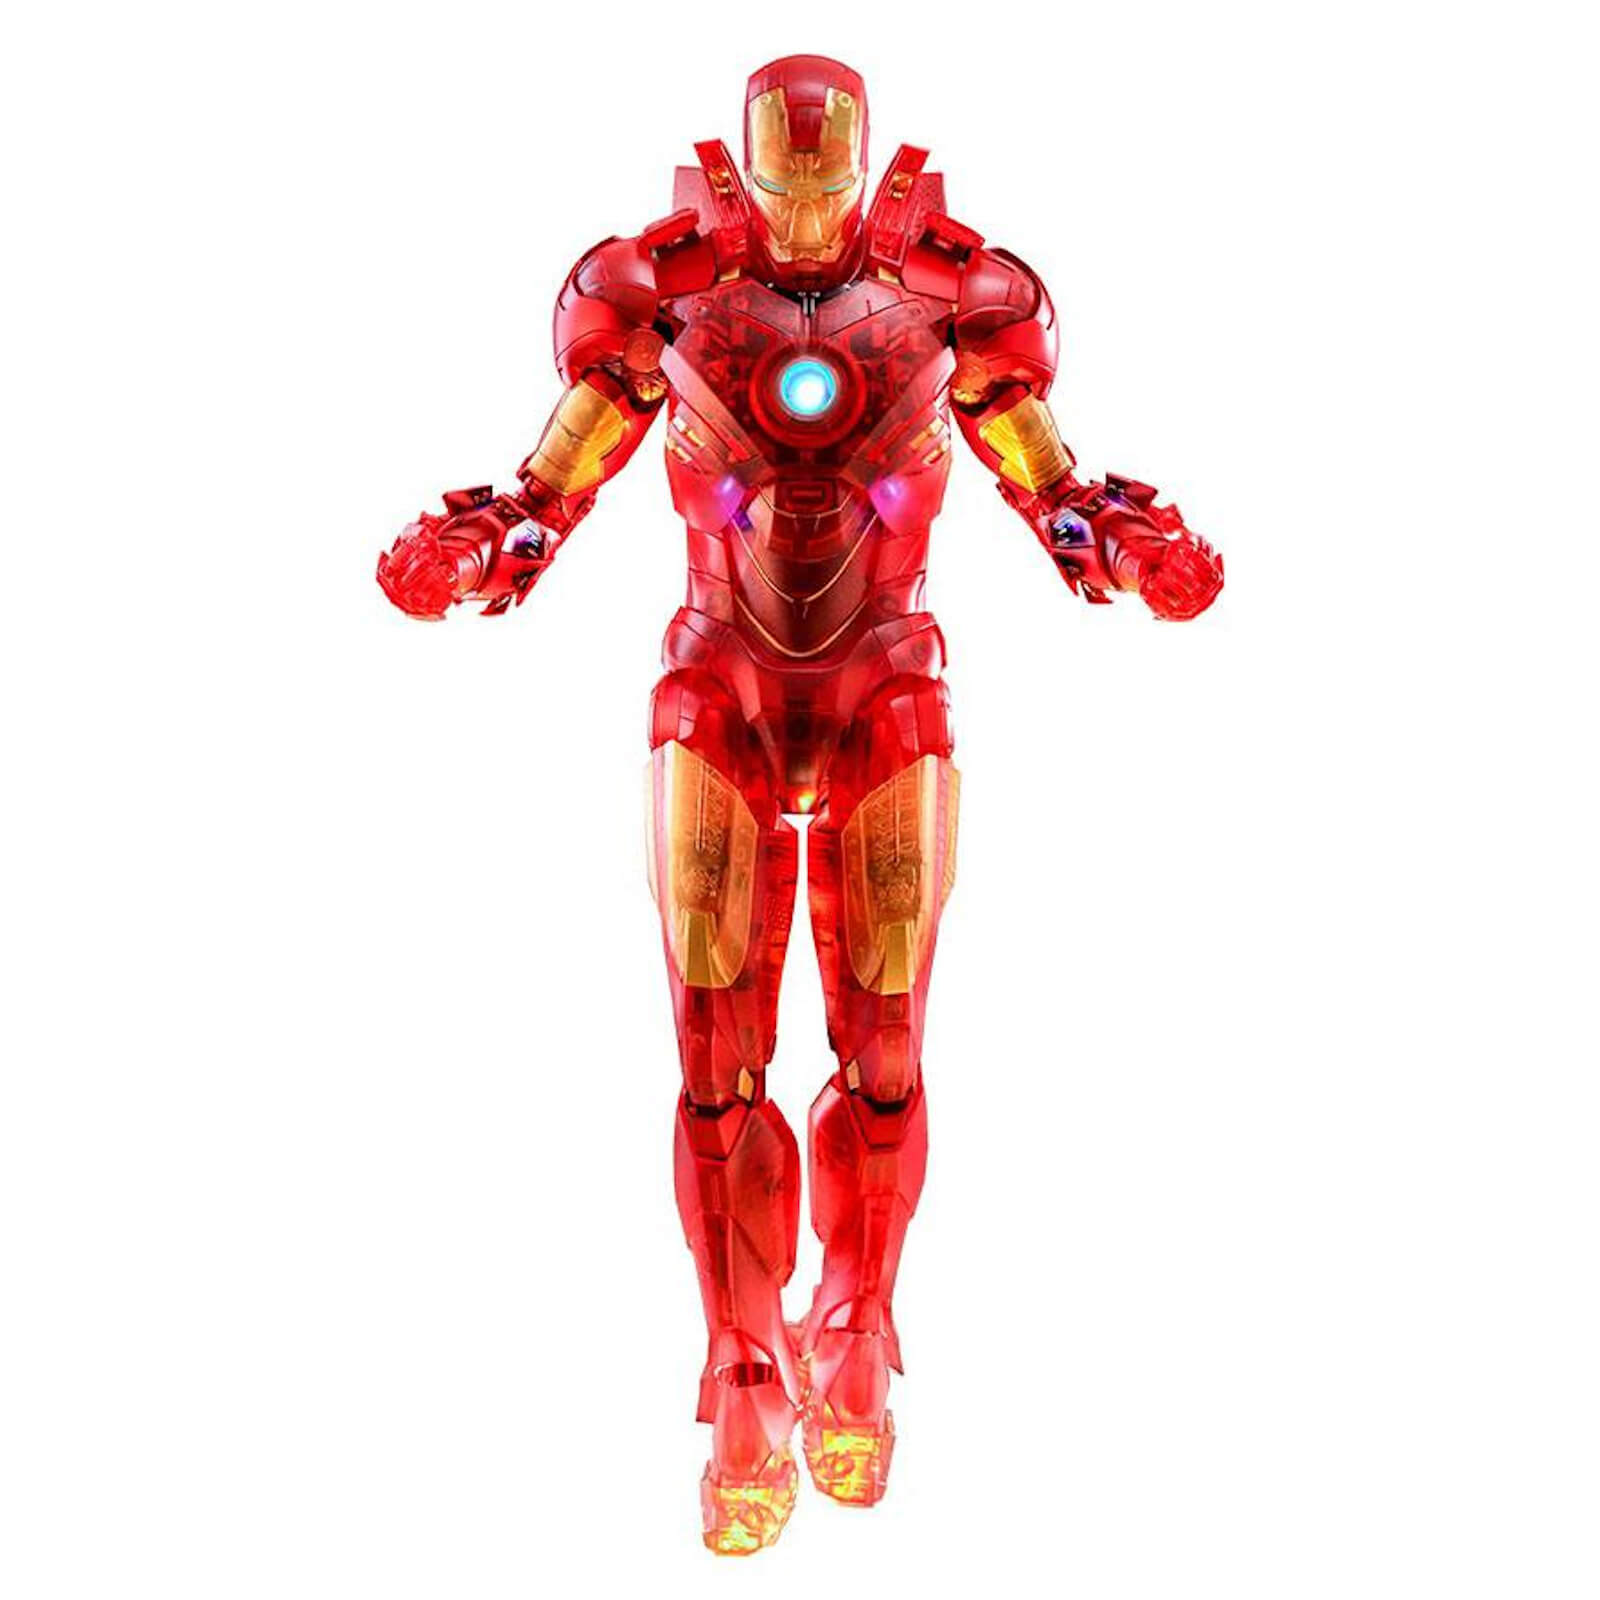 Image of Hot Toys Marvel Iron Man Mark IV (Holographic Version) Toy Fair Exclusive Action Figure 30cm